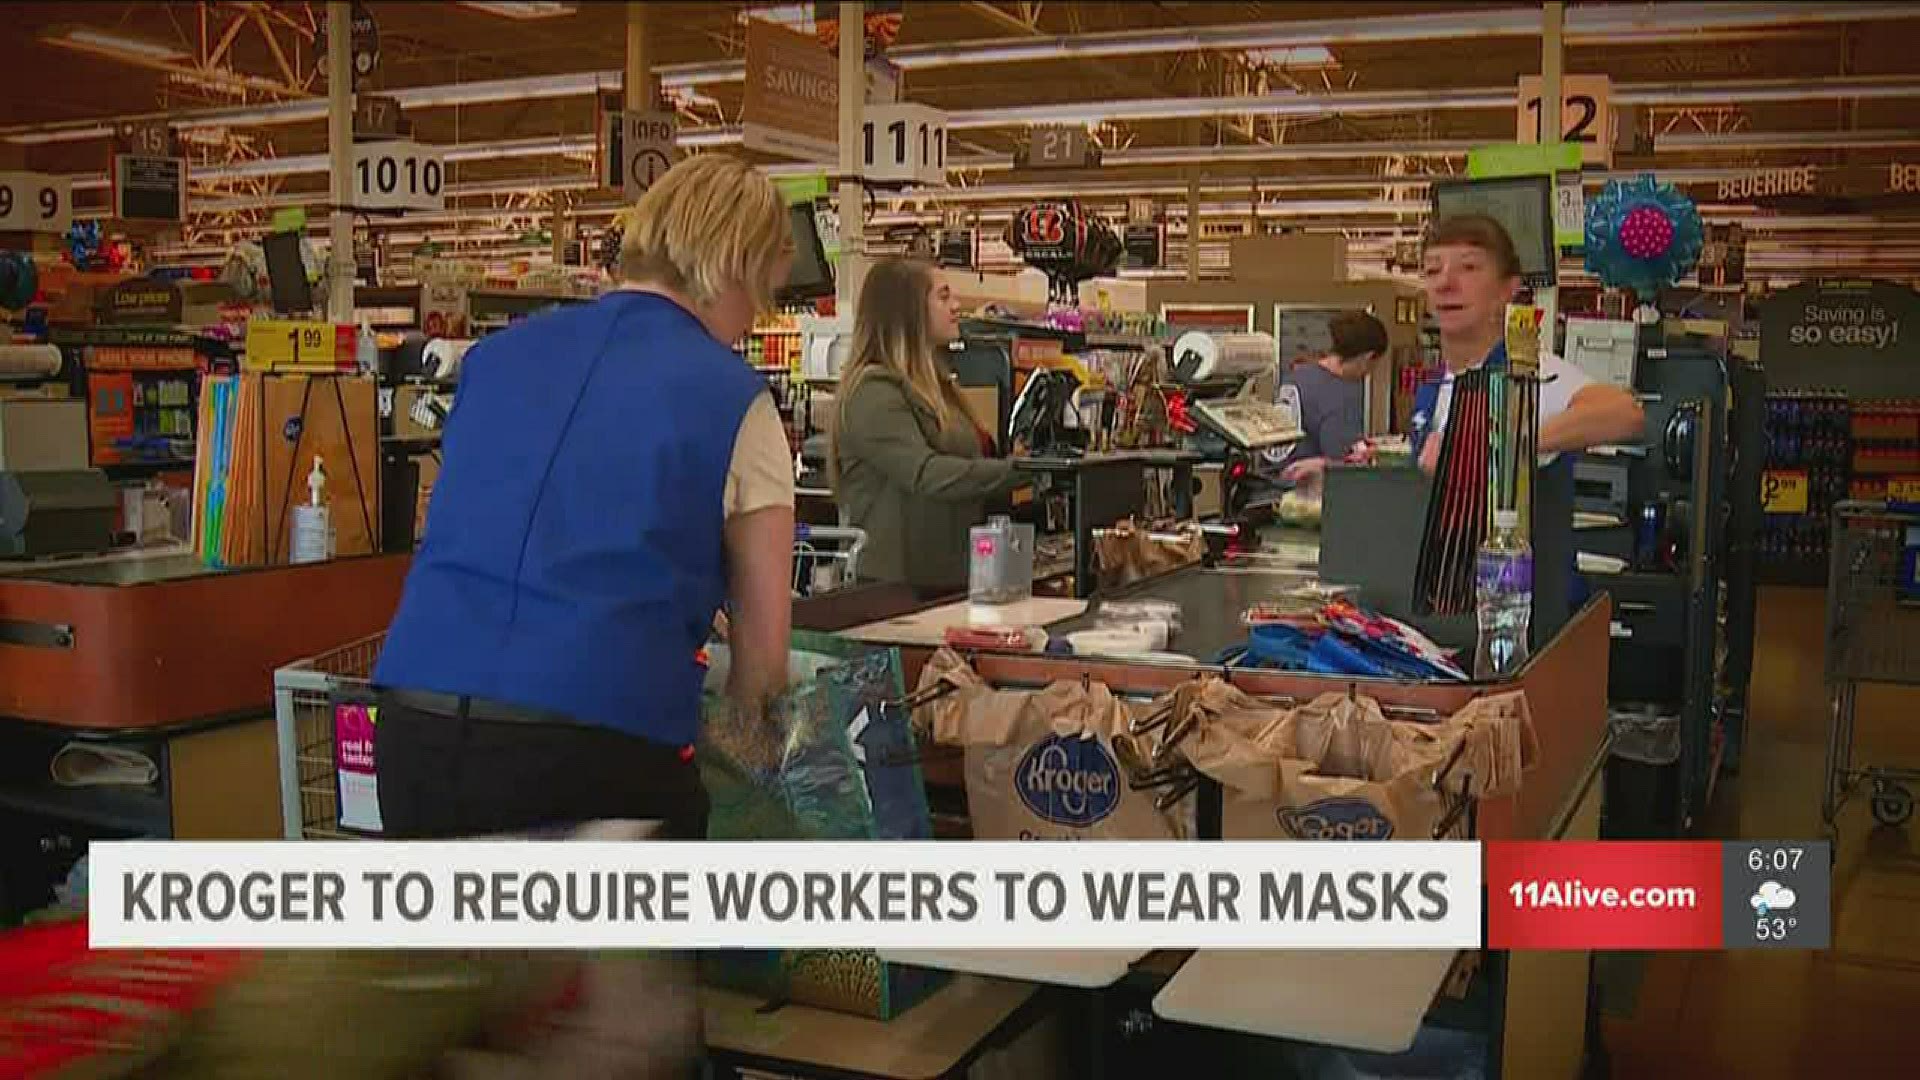 The grocery chain is further ramping up safety precautions amid the coronavirus pandemic.